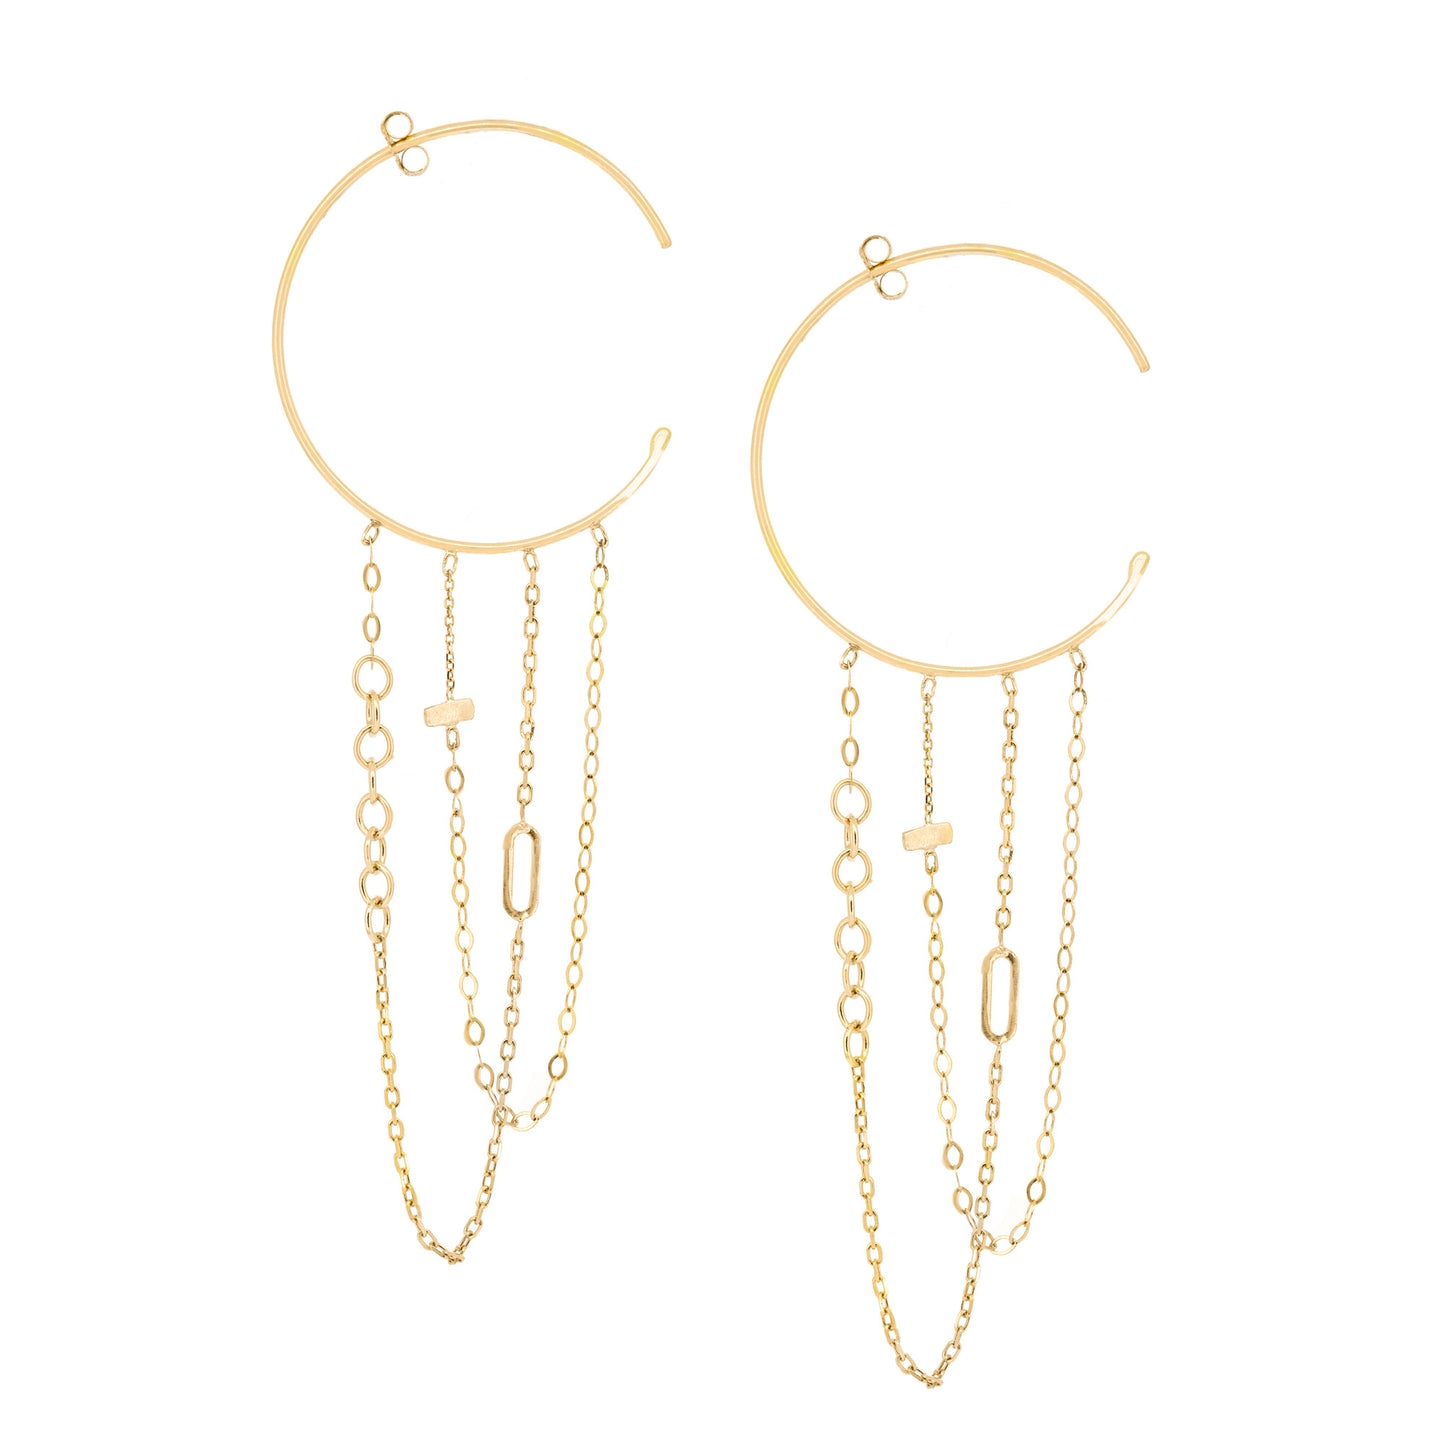 18ct Gold Chains Galore dangling hoops